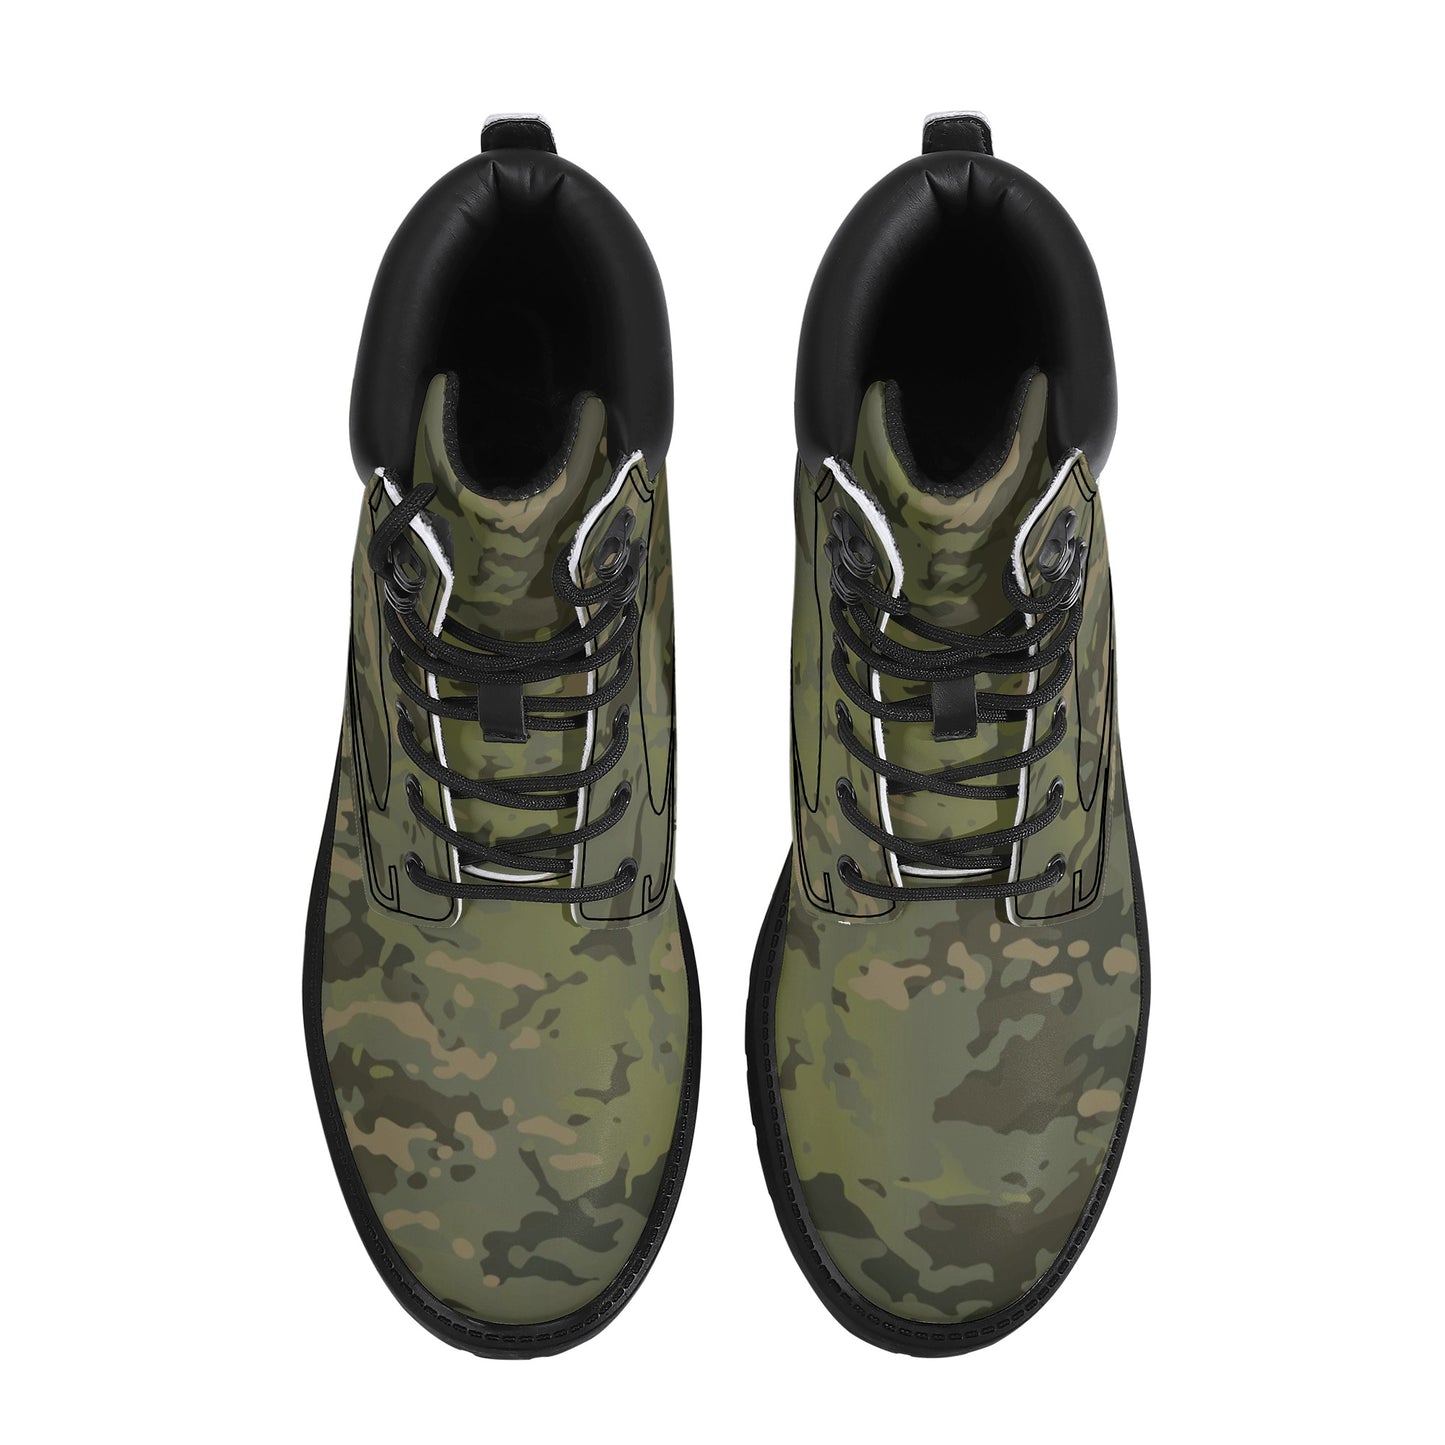 Multicam Tropic Mens All Season Leather Boots